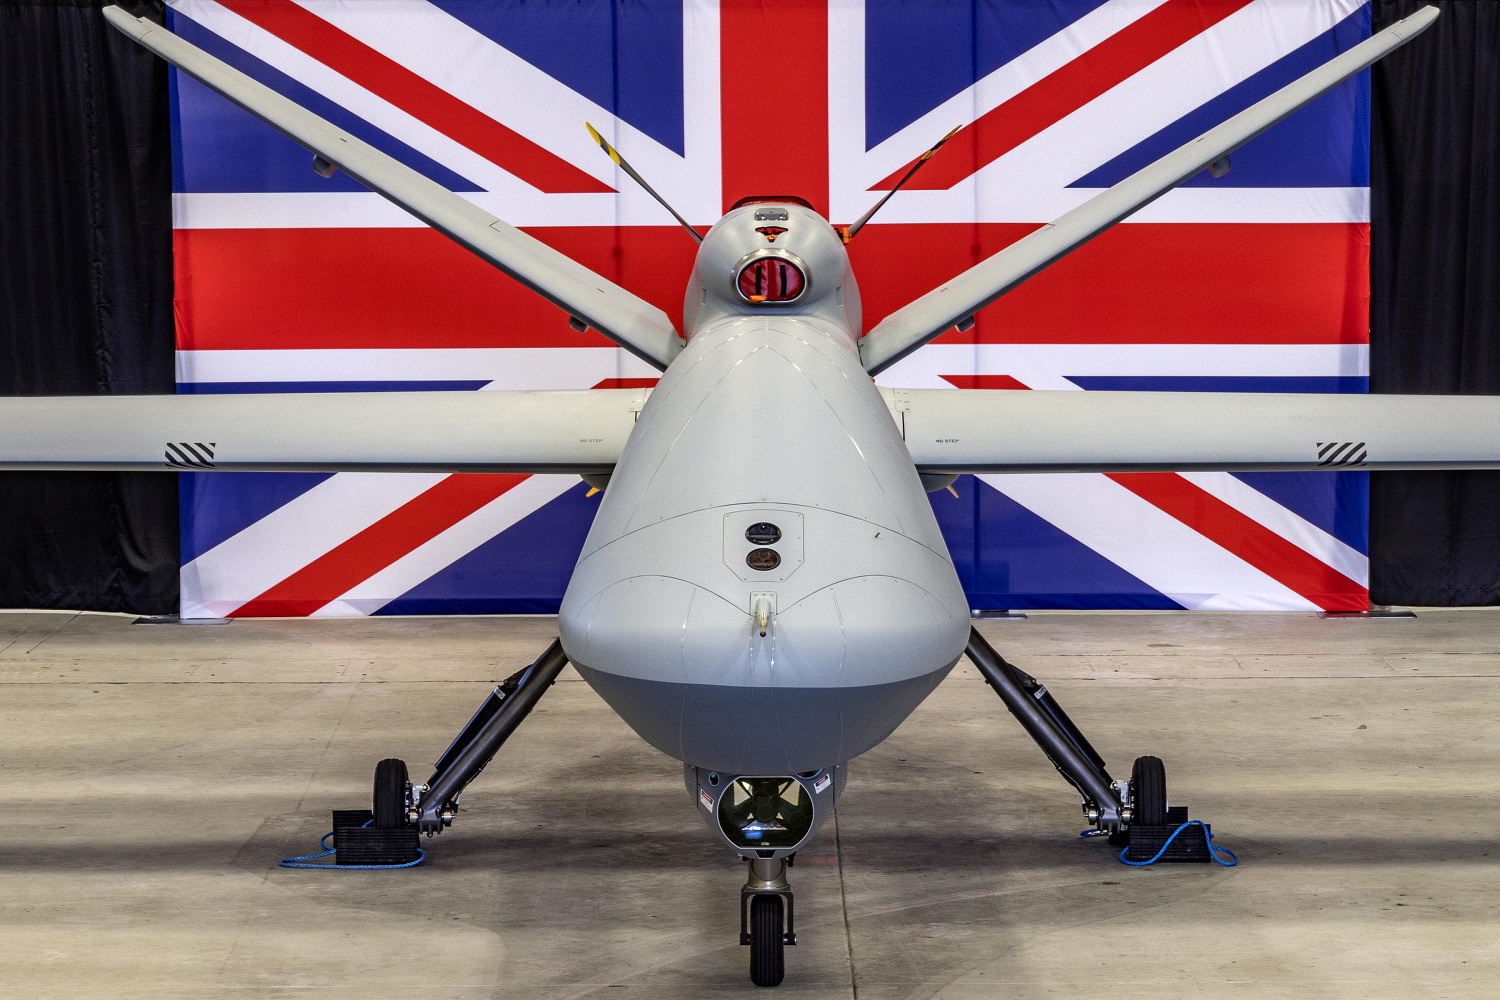 On the 30th of September 2023, The new Royal Air Force (RAF) Protector MQ-9B Aircraft was delivered to RAF Waddington by an Antanov AN 124-100M aircraft from General Atomics Aeronautical Systems, Inc. (GA-ASI).